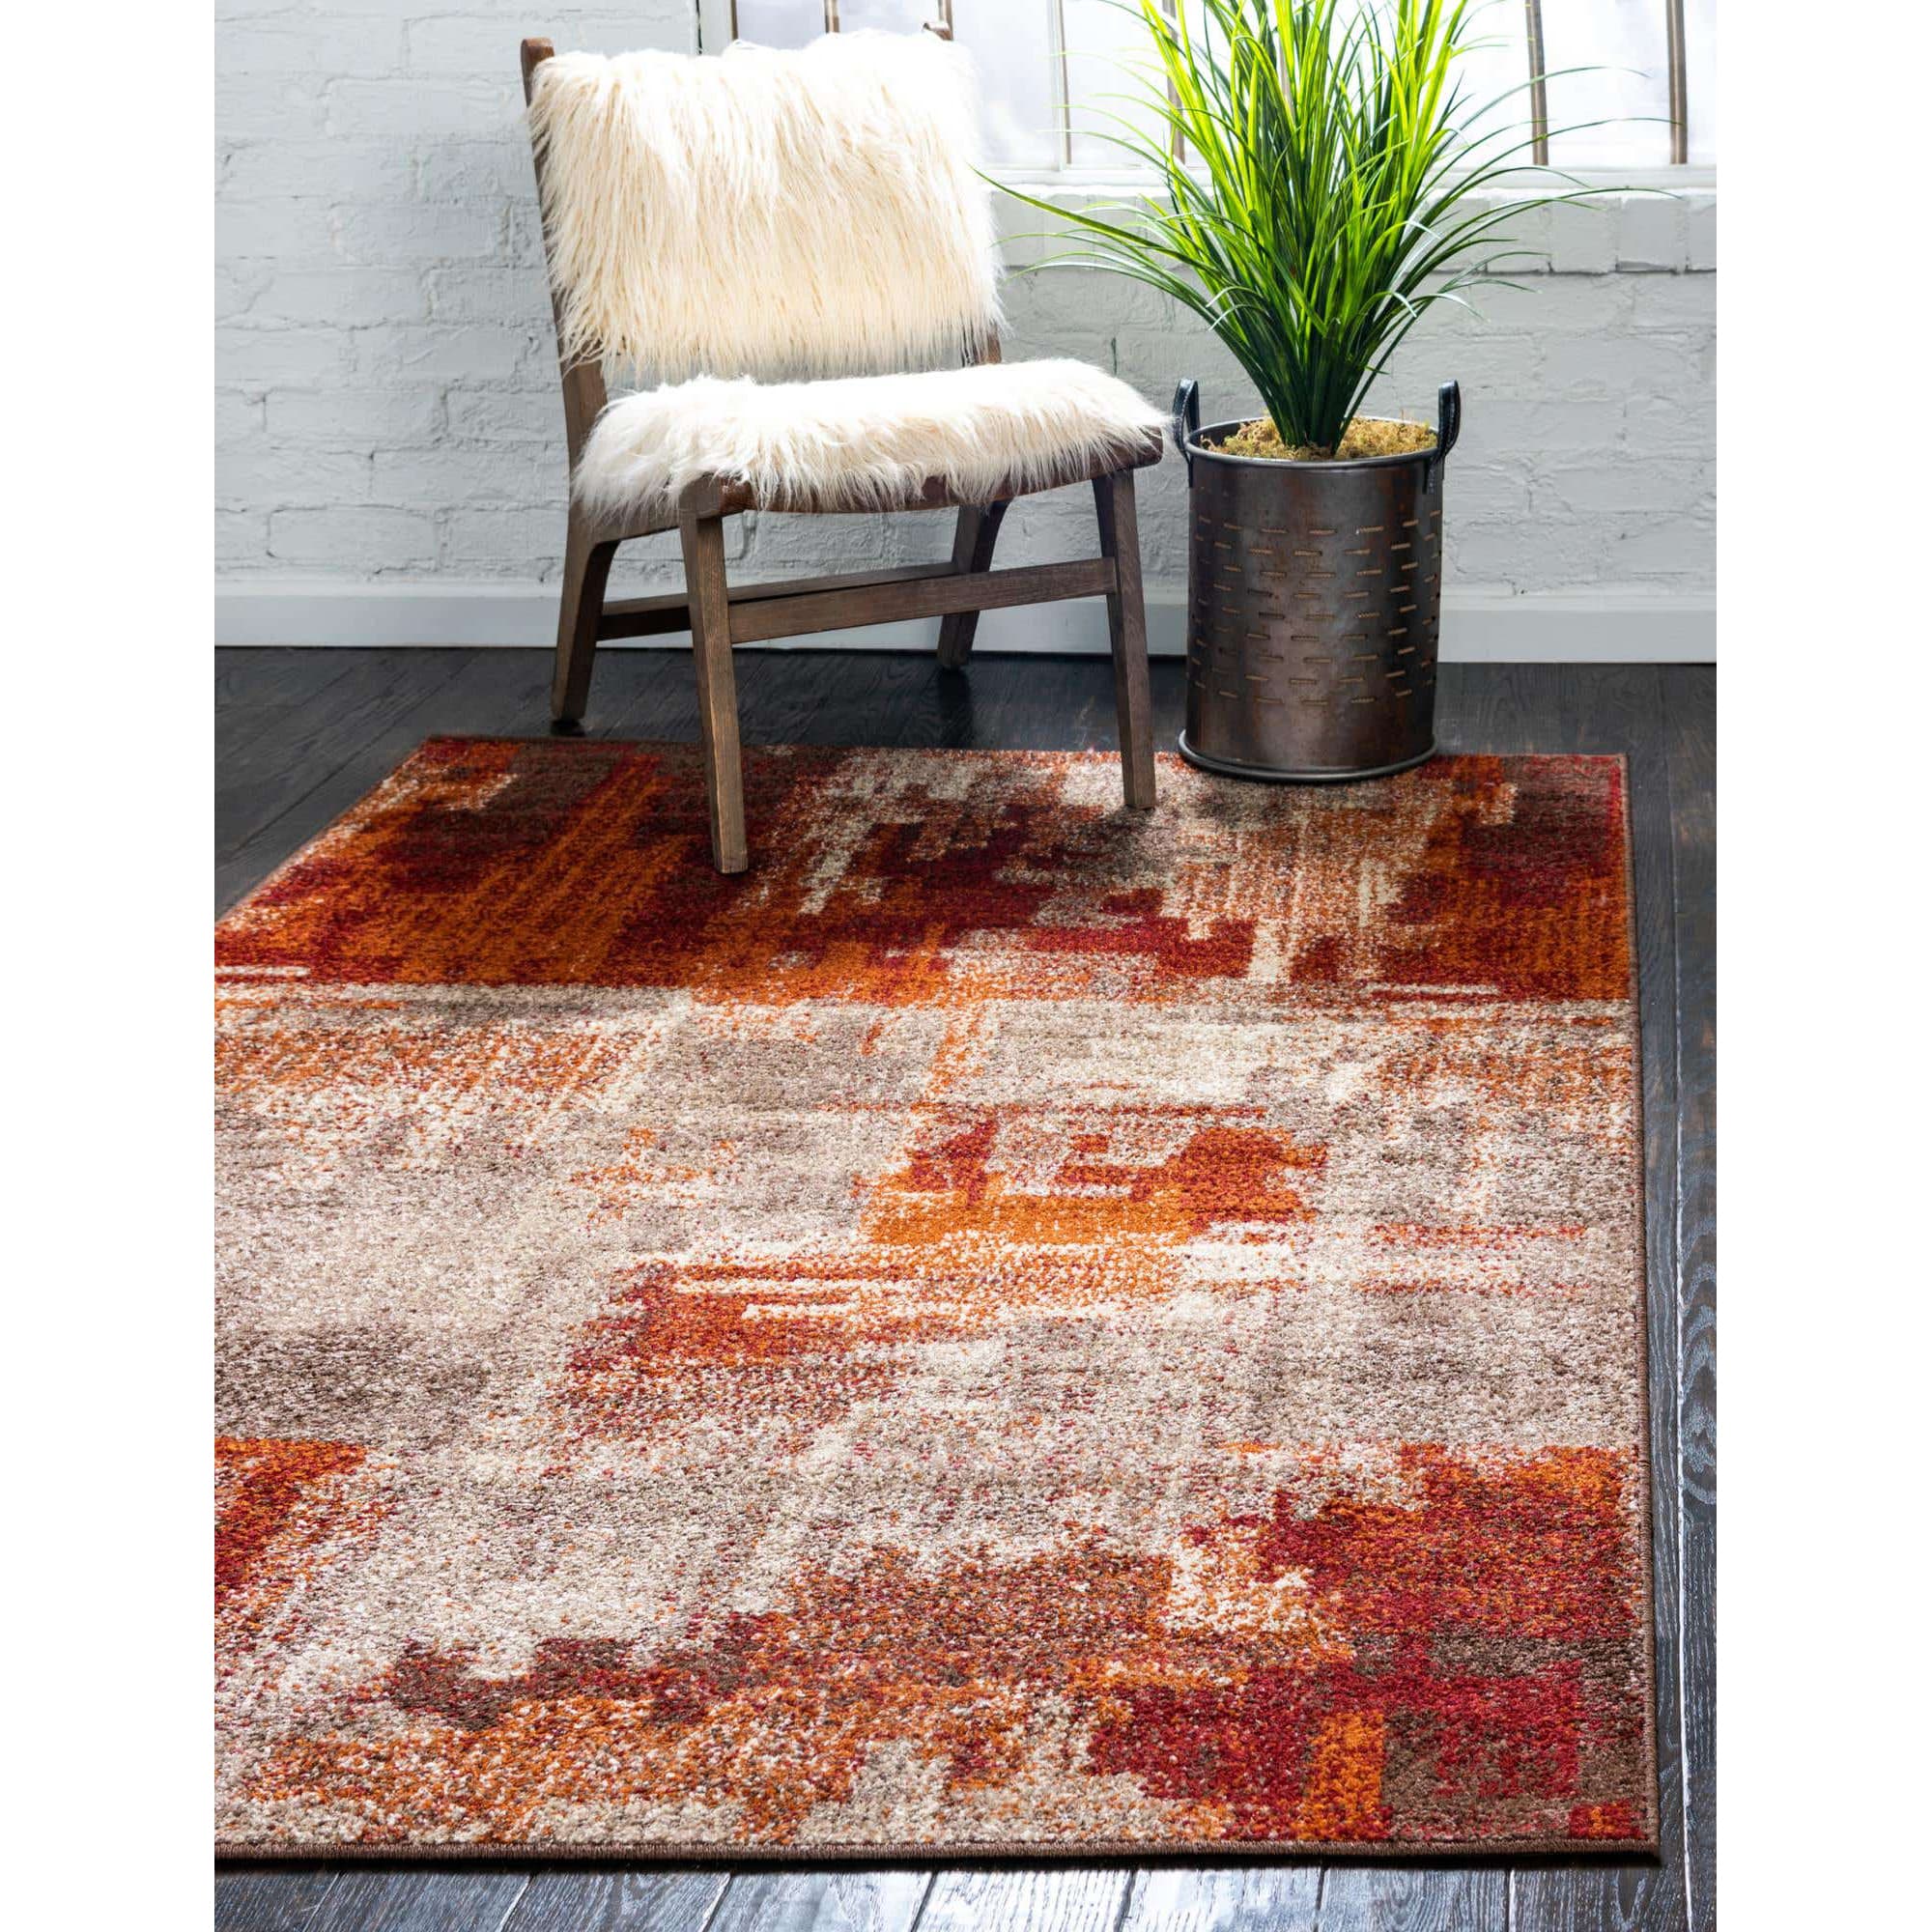 15 Awesome Places to Buy Affordable Rugs Online 2022 | Apartment Therapy